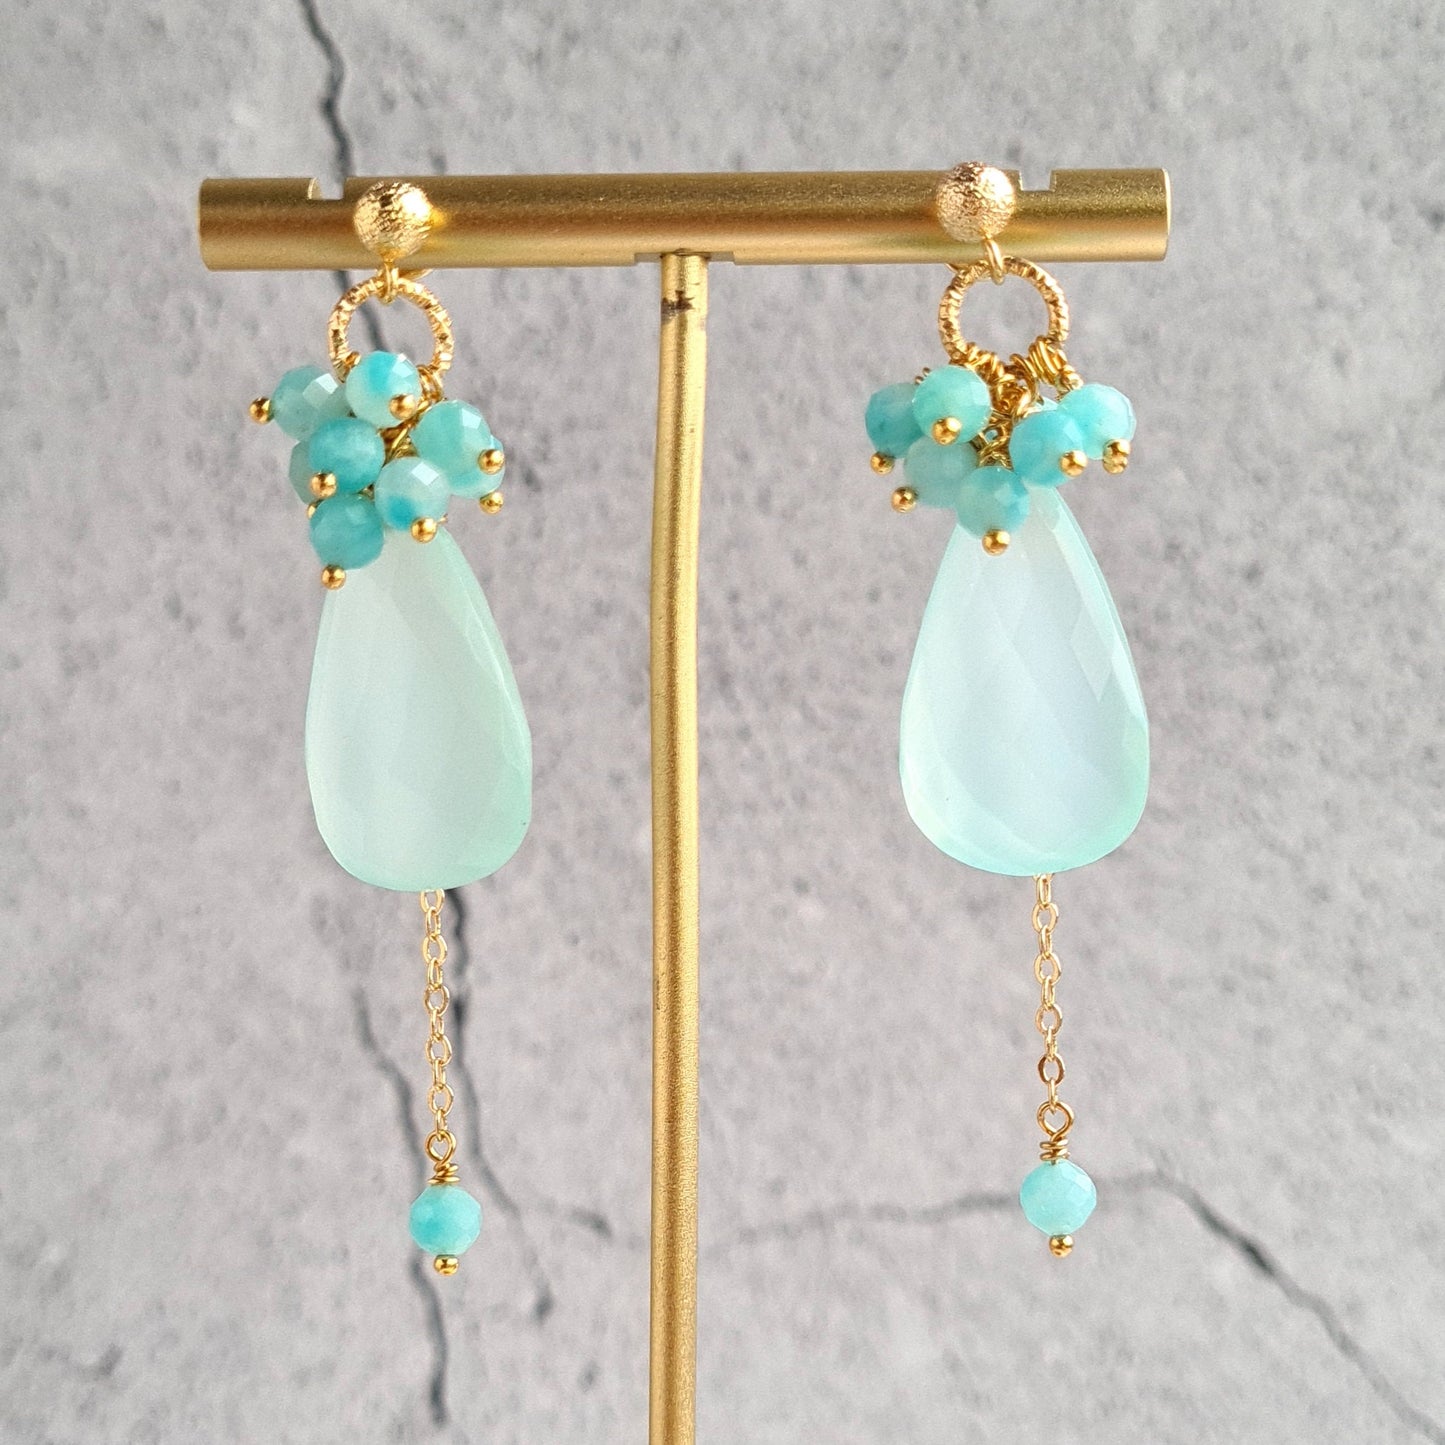 Aqua Blue Chalcedony Cluster Gemstone with Amazonite Earrings & Necklace Set